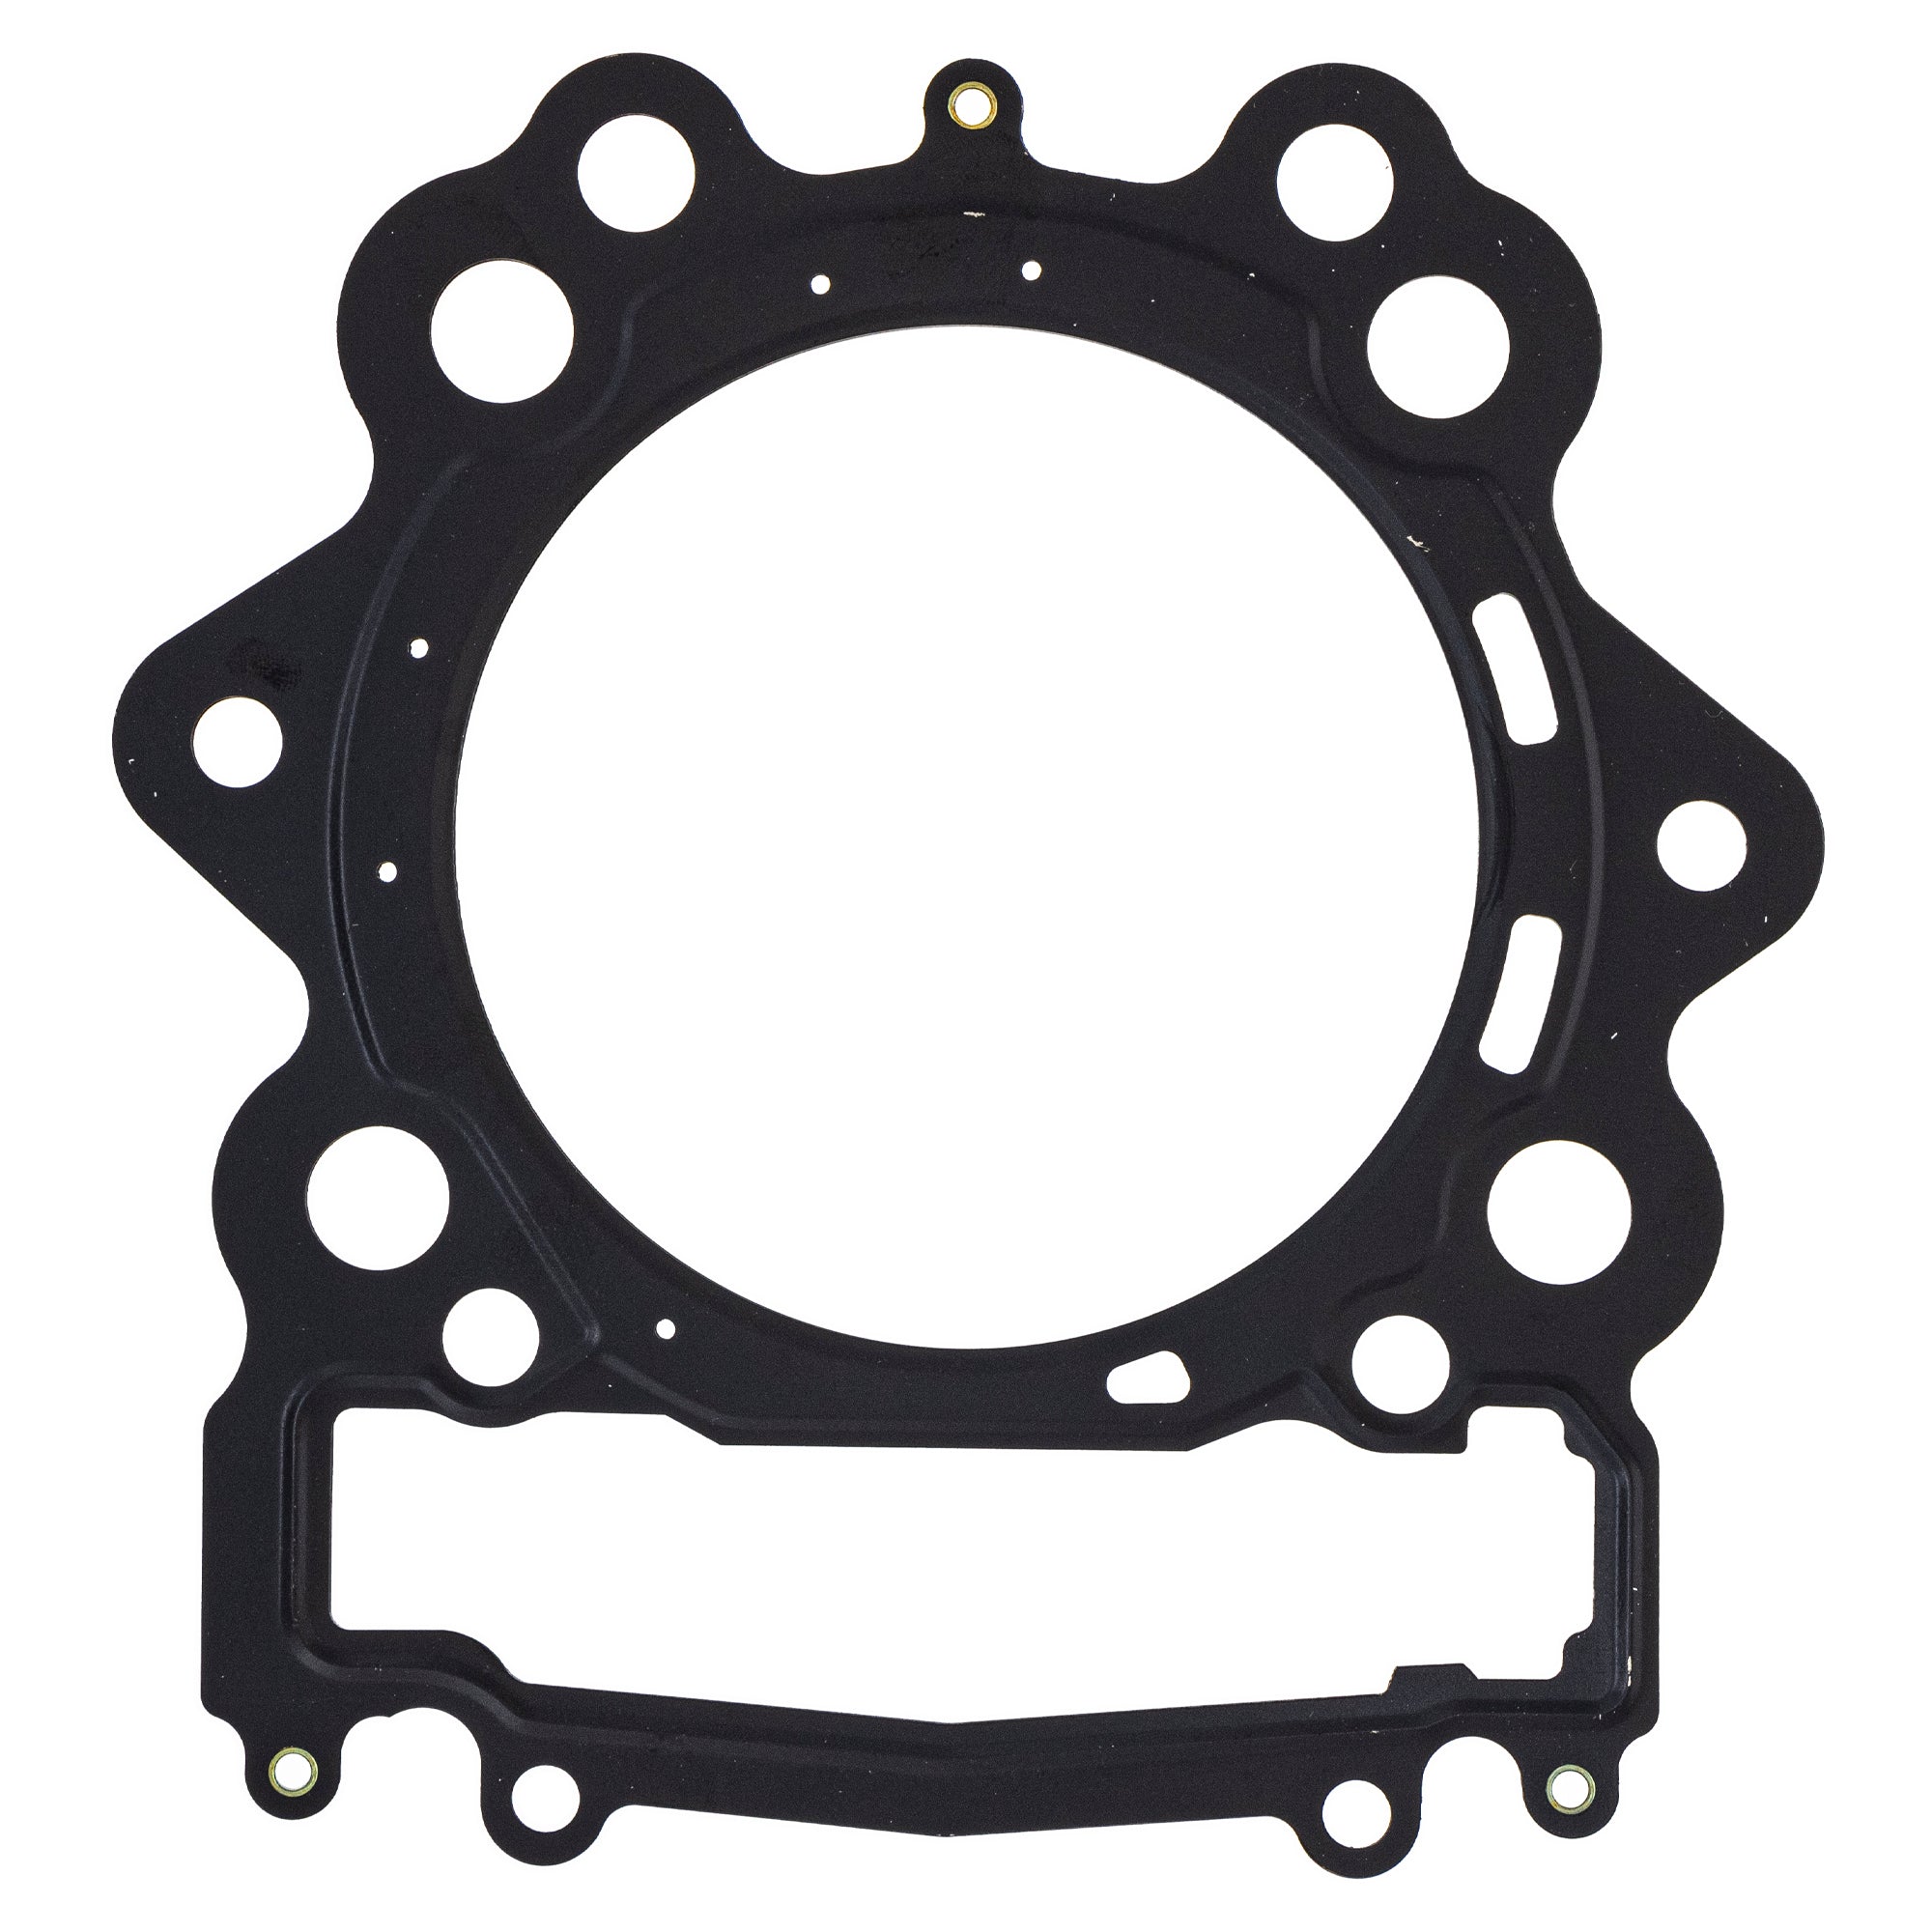 734cc Big Bore Cylinder Gasket Kit for Yamaha Grizzly 550 1S3-11310-01